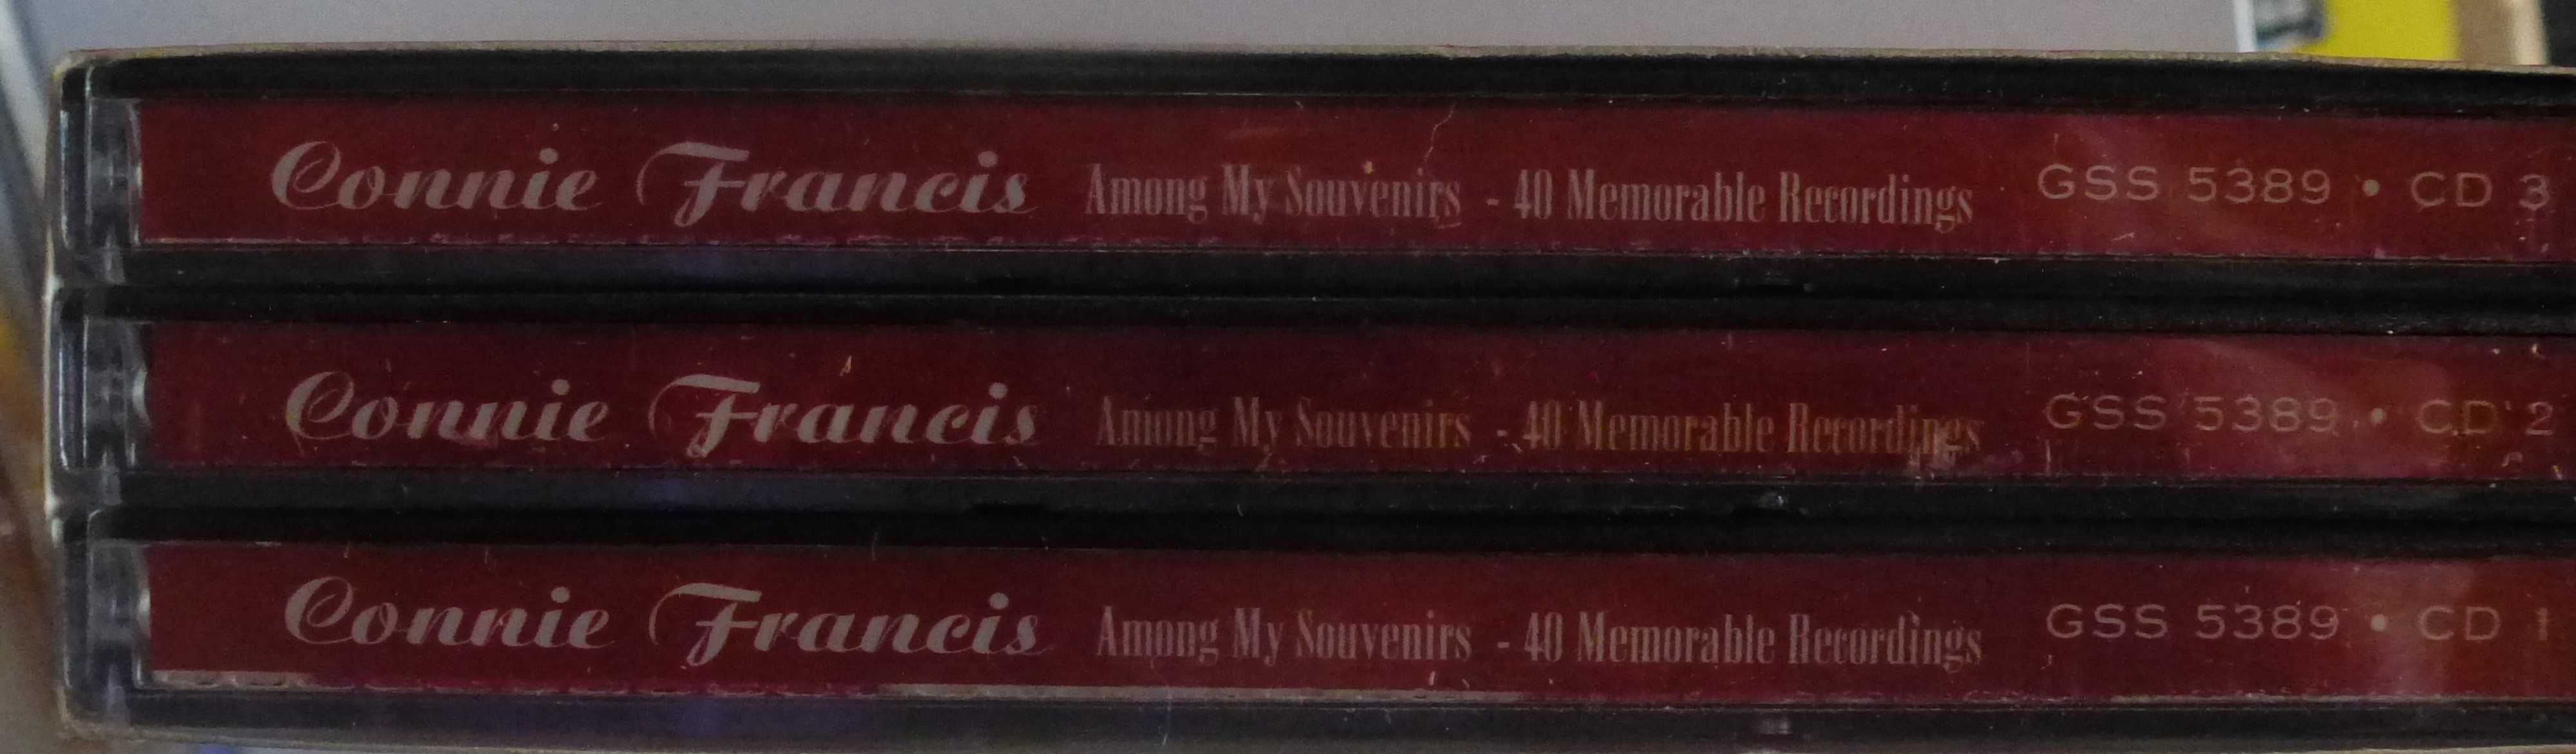 3 CD Connie Francis Among My Souvenirs